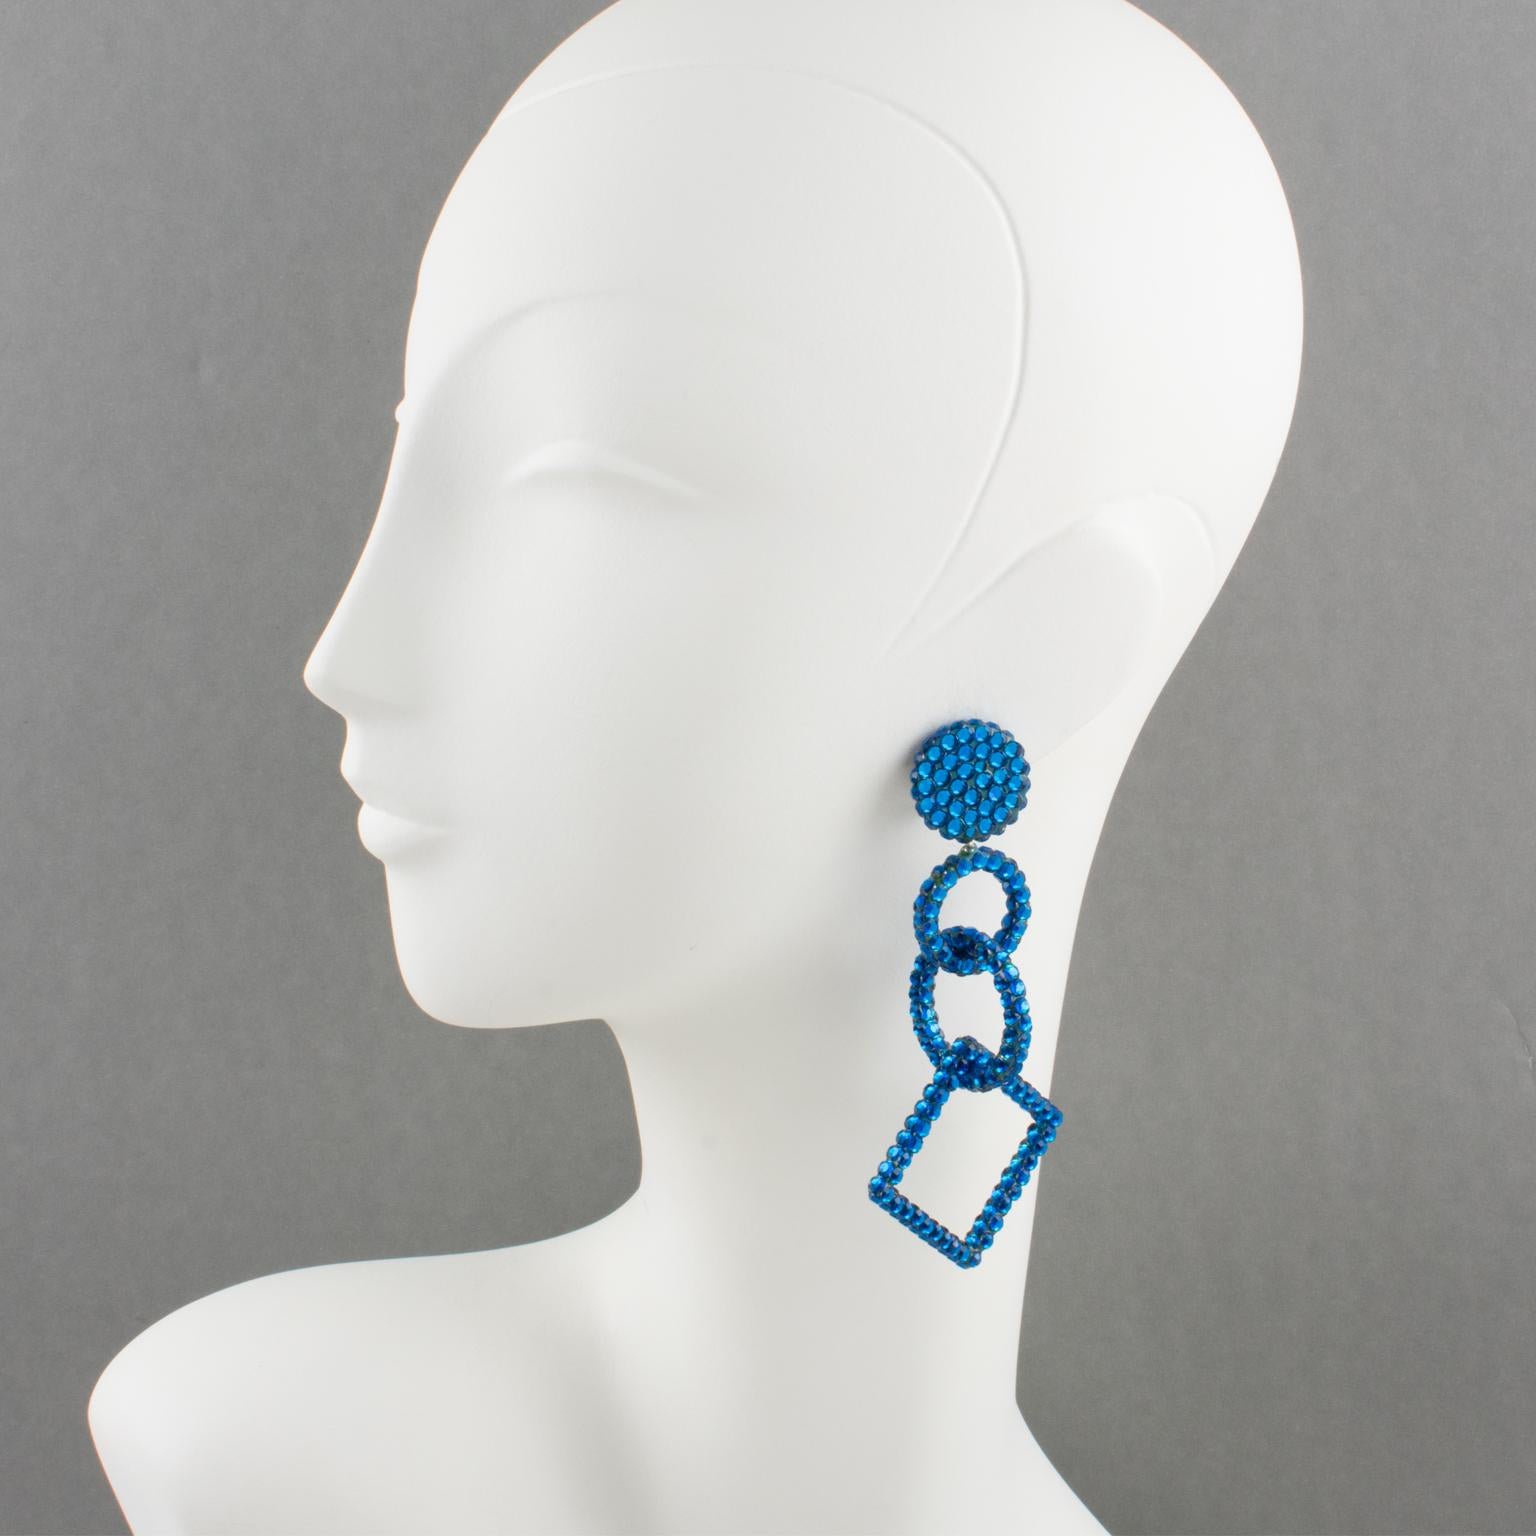 Stunning statement chandelier clip-on earrings designed by Richard Kerr in the 1980s. They are made up of his signature pave rhinestones. Featuring oversized shape design with geometric-shaped dangling elements all covered with cobalt blue crystal